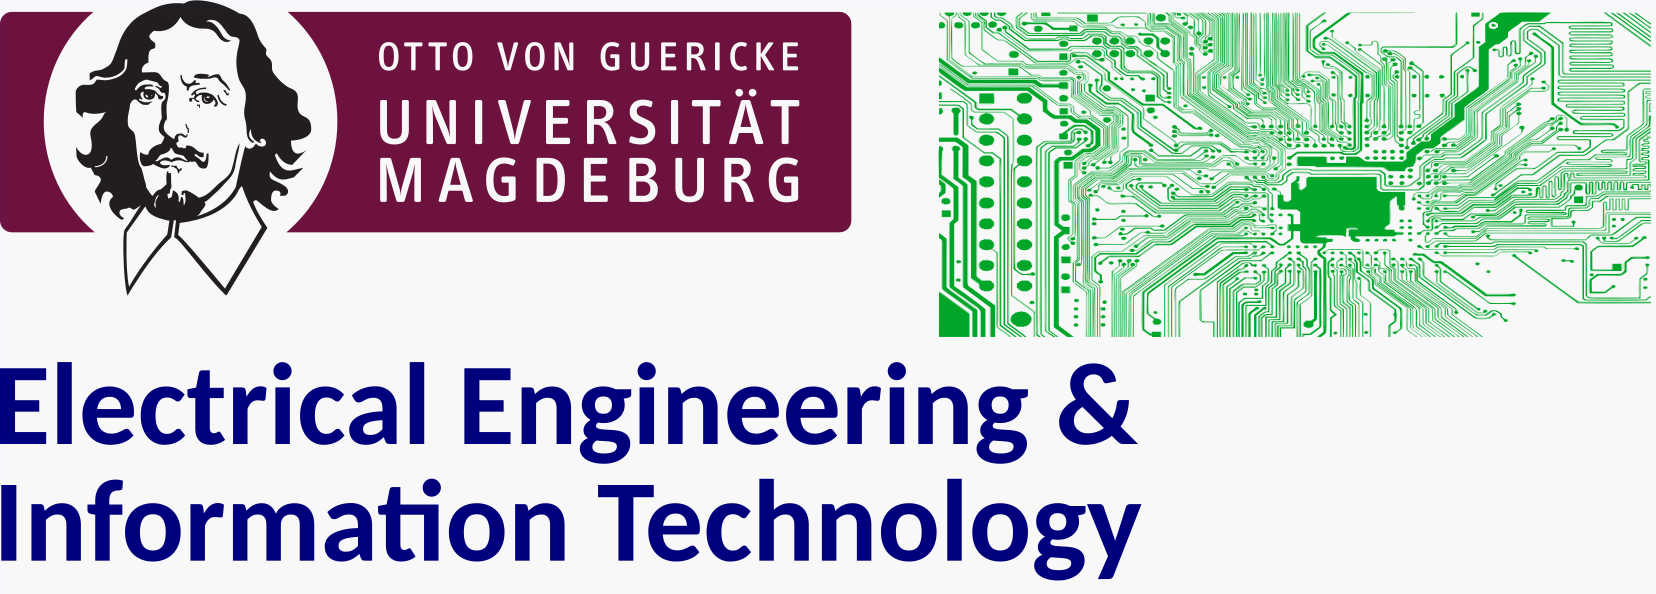 Electrical Engineering & Information Technology - GRIAT double degree